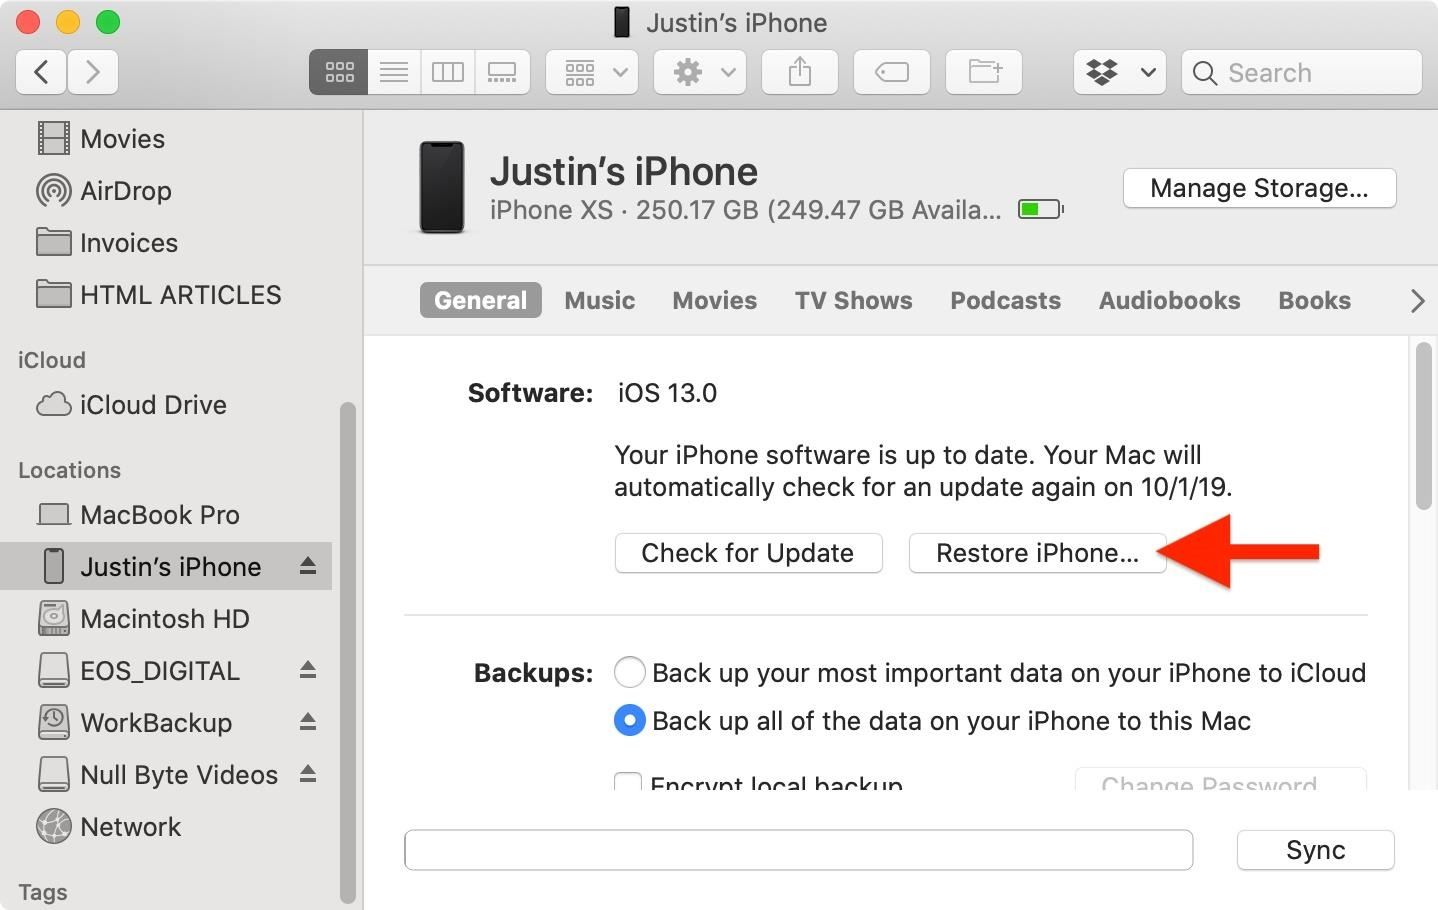 How to Downgrade iOS 13 Back to iOS 12.4.1 on Your iPhone Using iTunes or Finder